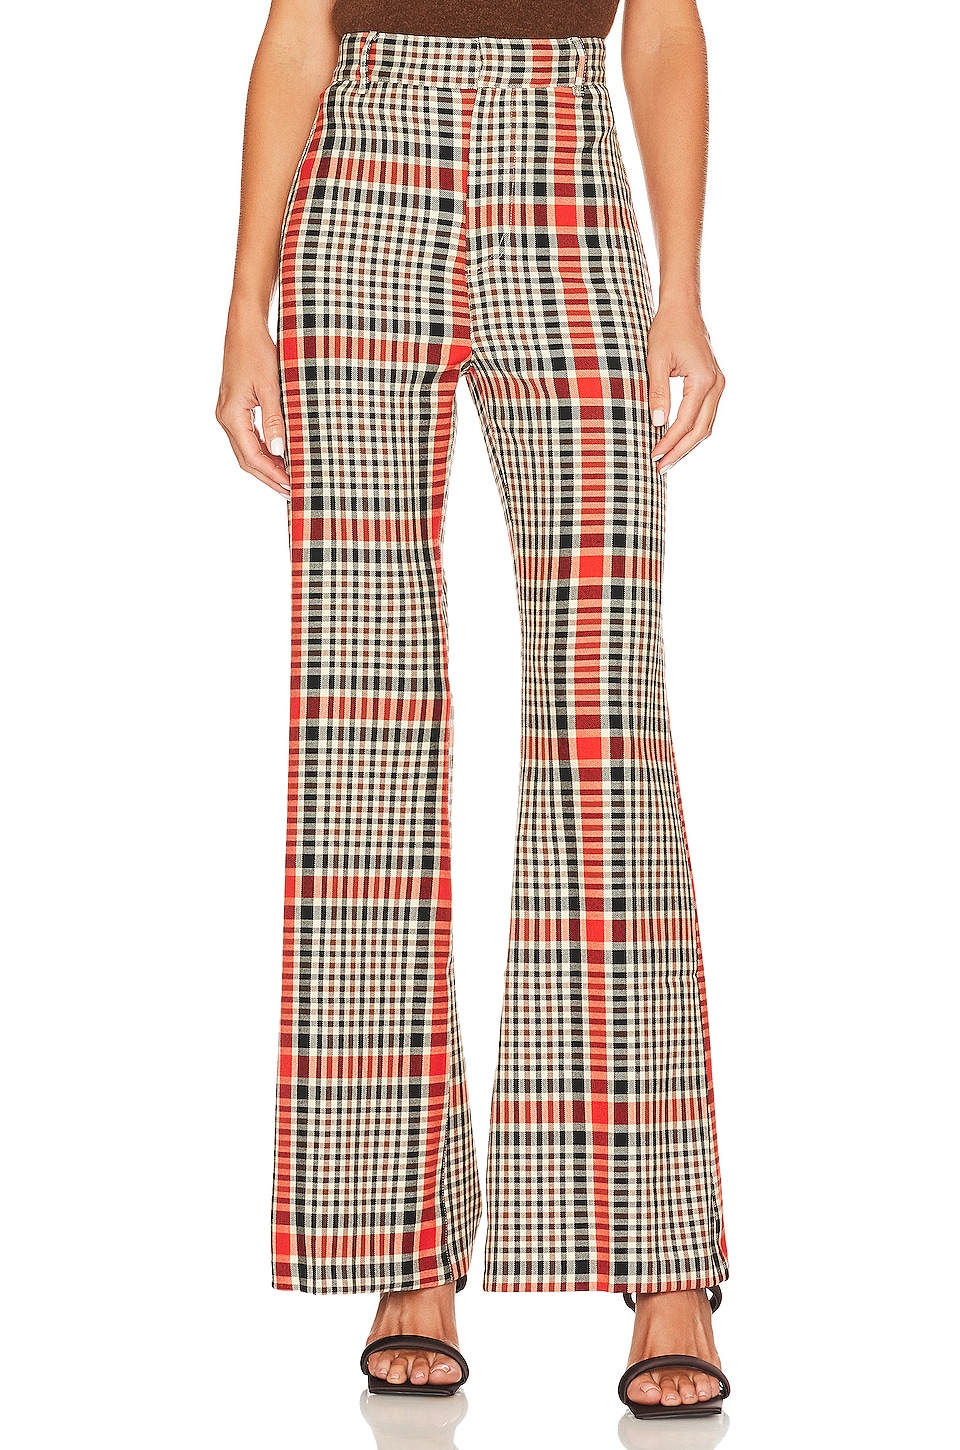 Free People Plaid Jules Pant in Rust Combo | REVOLVE